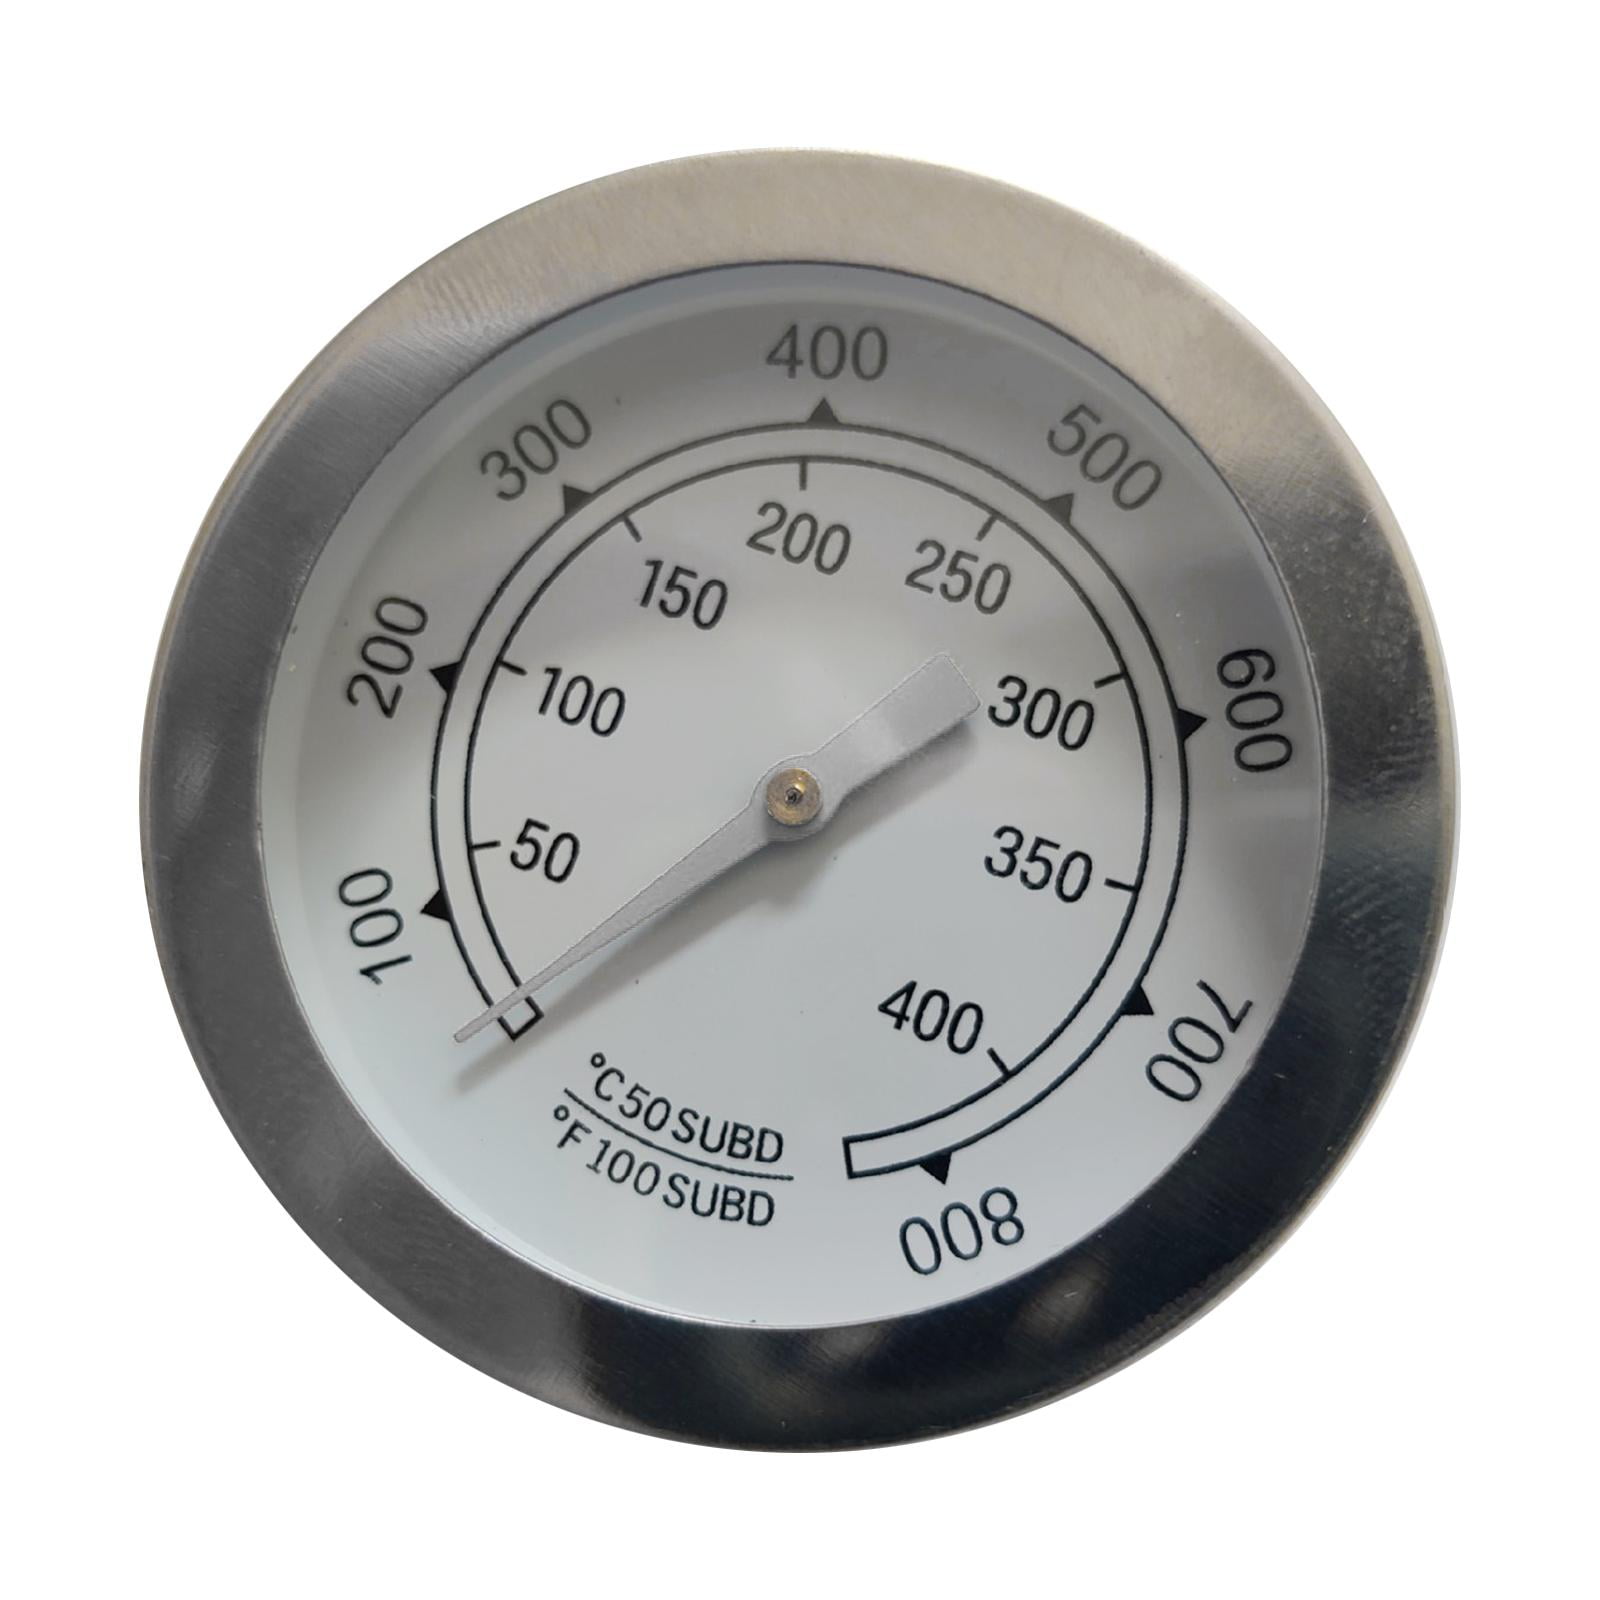 BBQ Smoker Grill Stainless Steel Thermometer Temperature Gauge 50-400℃ Q1N5 